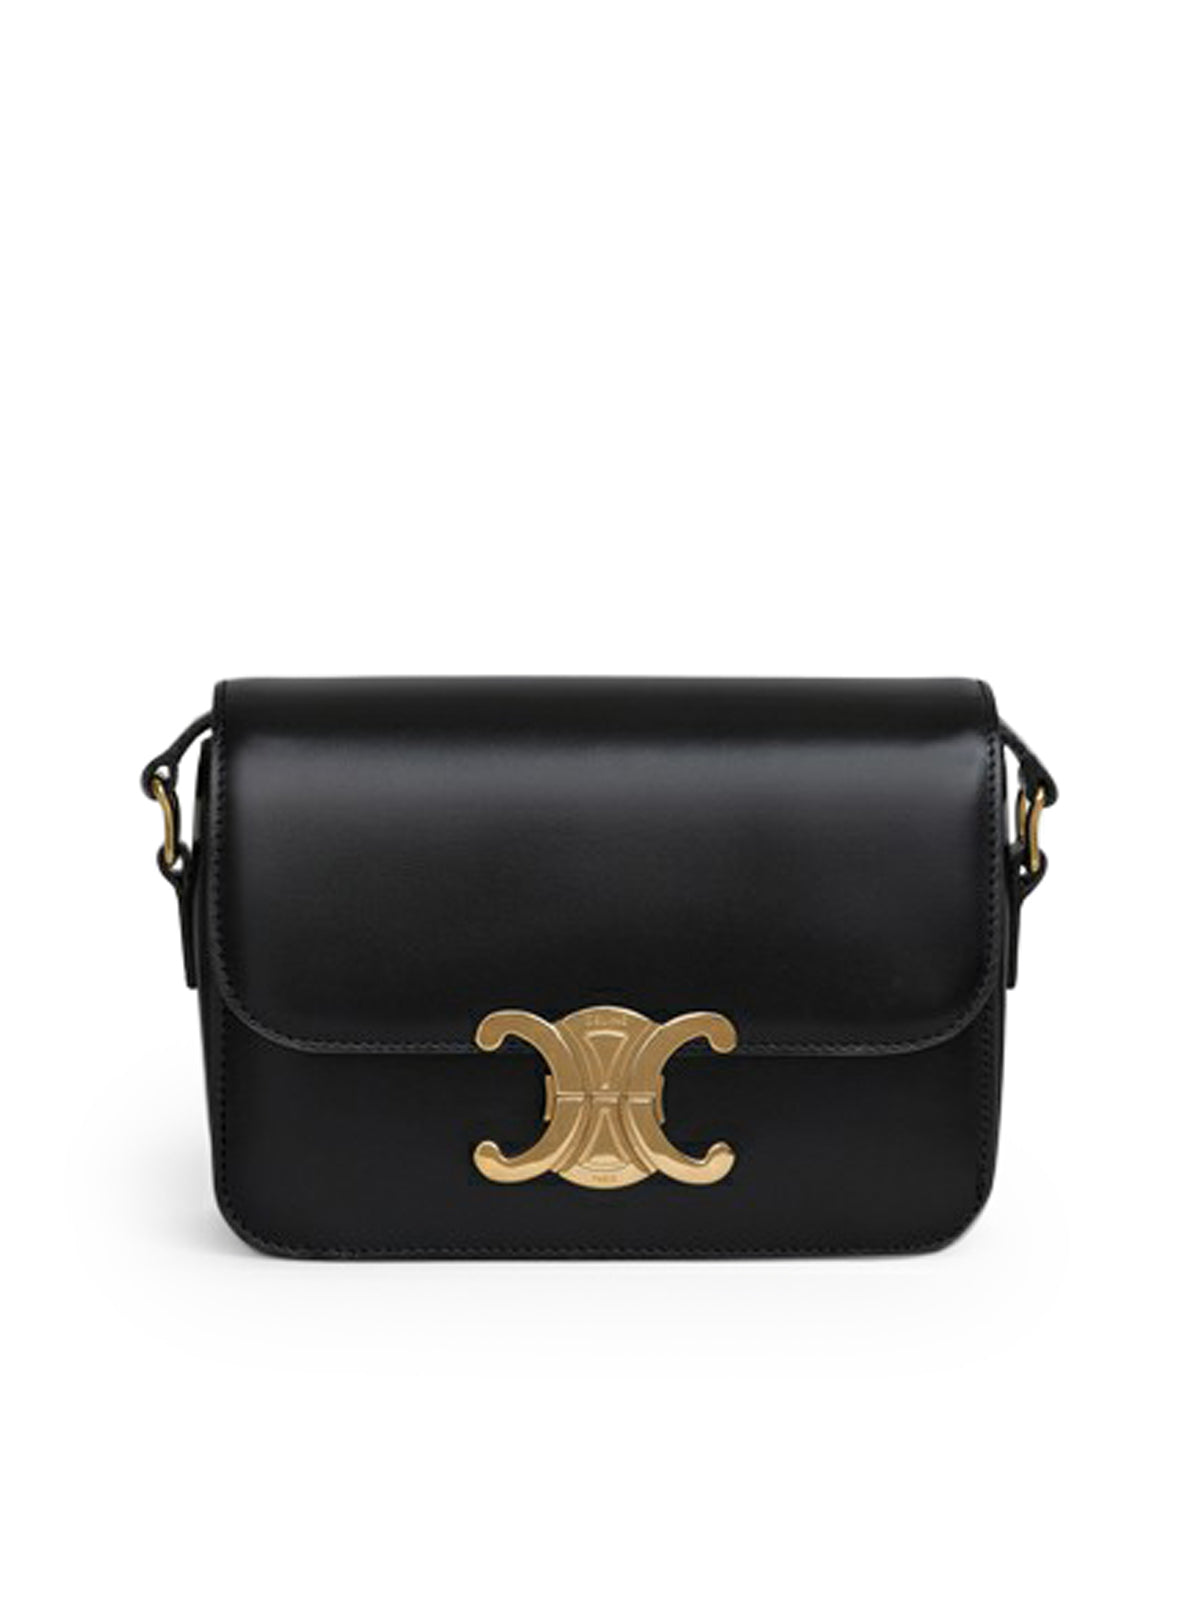 TRIOMPHE TEEN BAG IN SCHWARZ SHINY CALF LEATHER